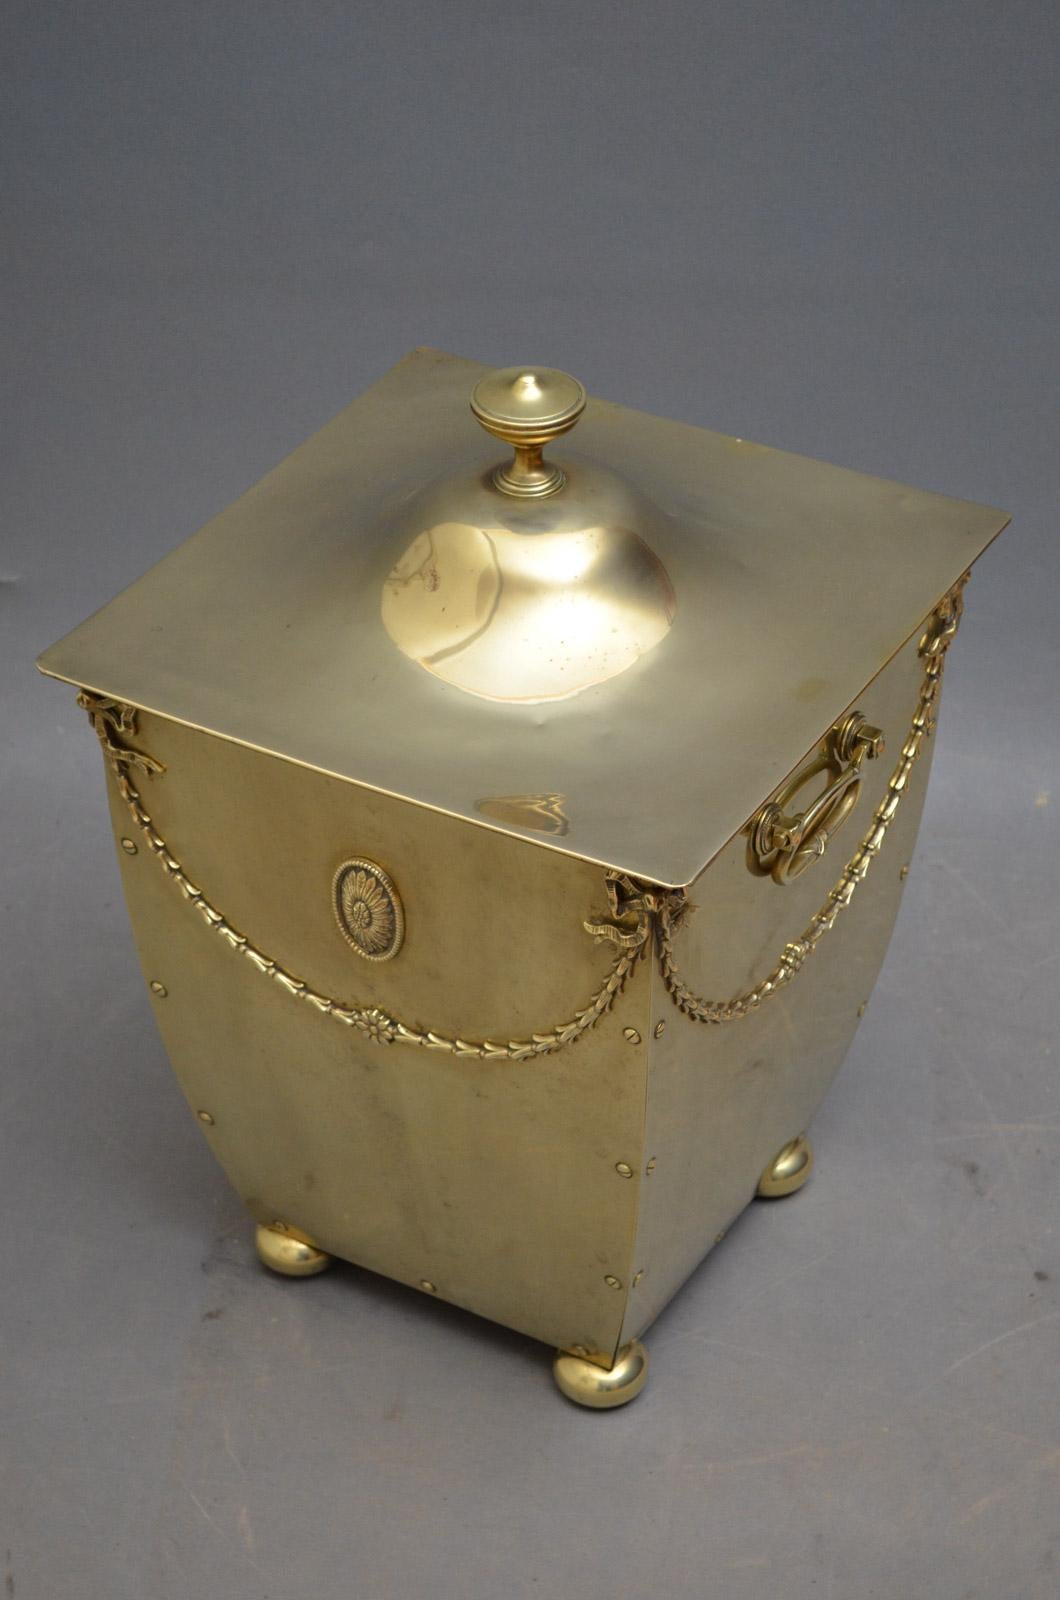 Sn4364, elegant Edwardian brass coal bin with lift up top, original liner and carrying handles, all with swags and bows decoration, standing on bun feet. This antique coal bucket would make a good planter, circa 1900.
Measures: H 20